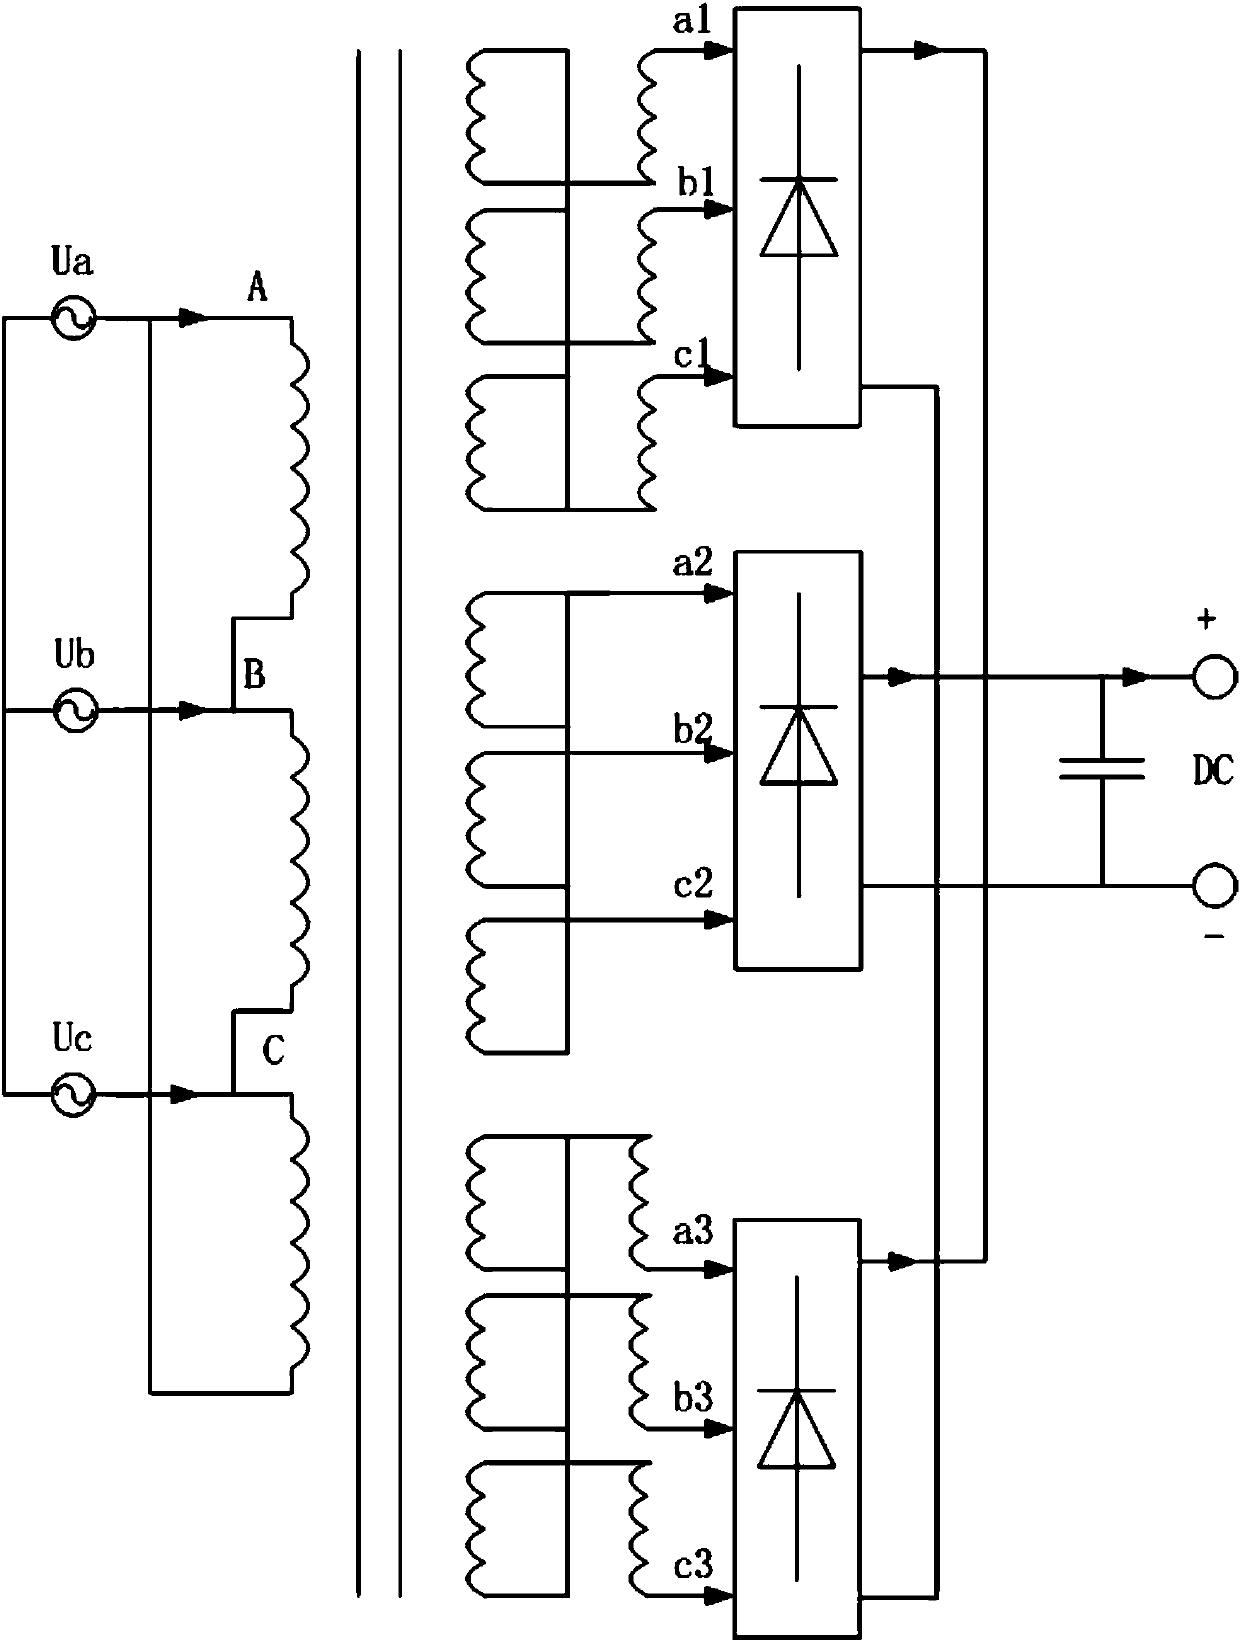 18-pulse phase shift rectifier transformer